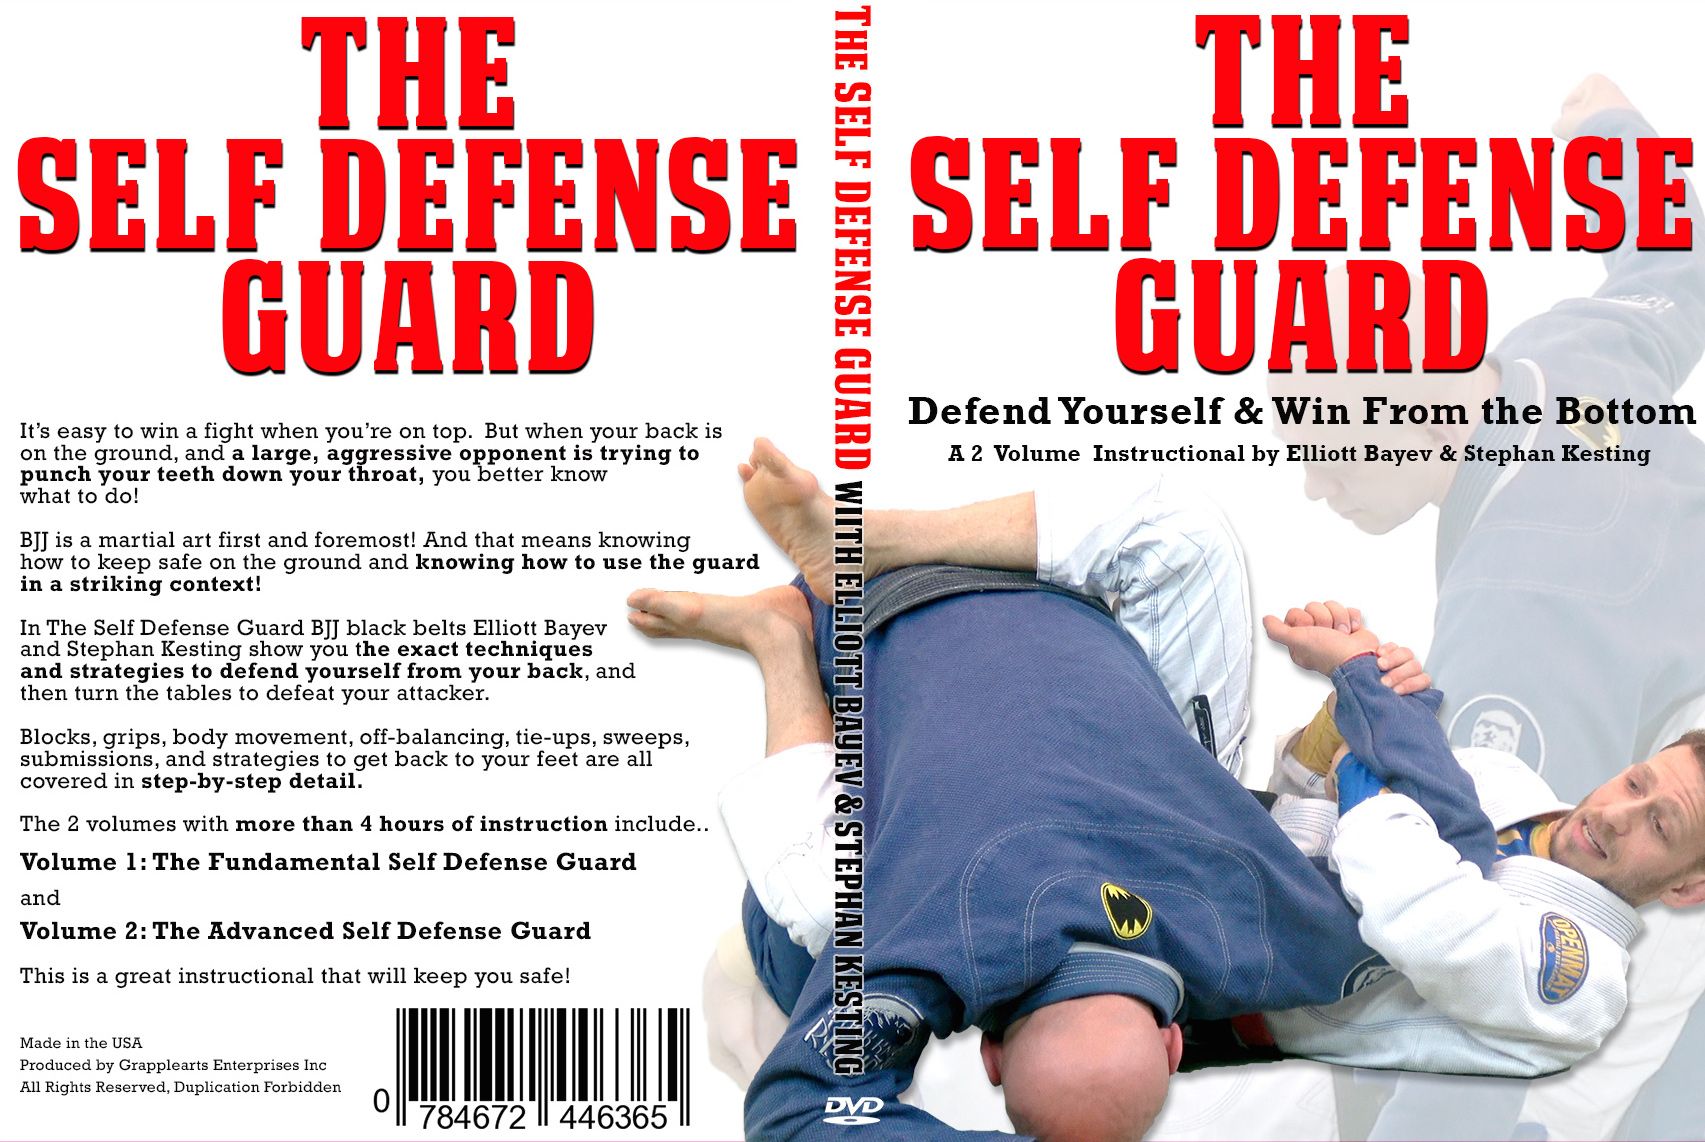 I Will Defend Myself: The Importance of Learning Self-Defense as a